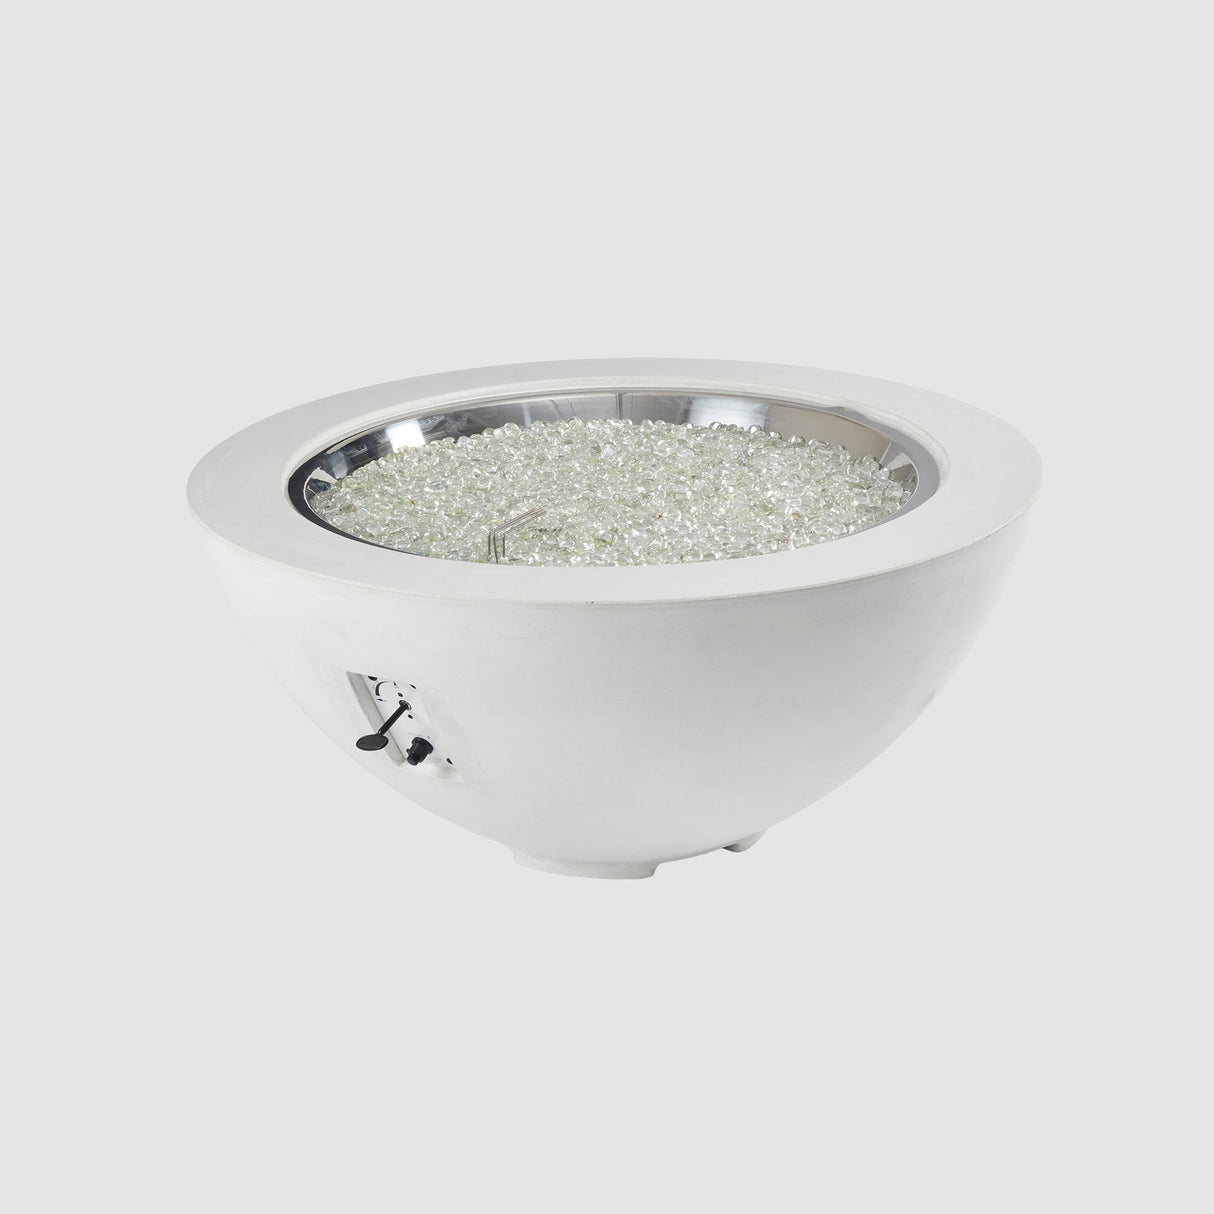 Fire gems on the burner of a White Cove Round Gas Fire Pit Bowl 42" on a grey background